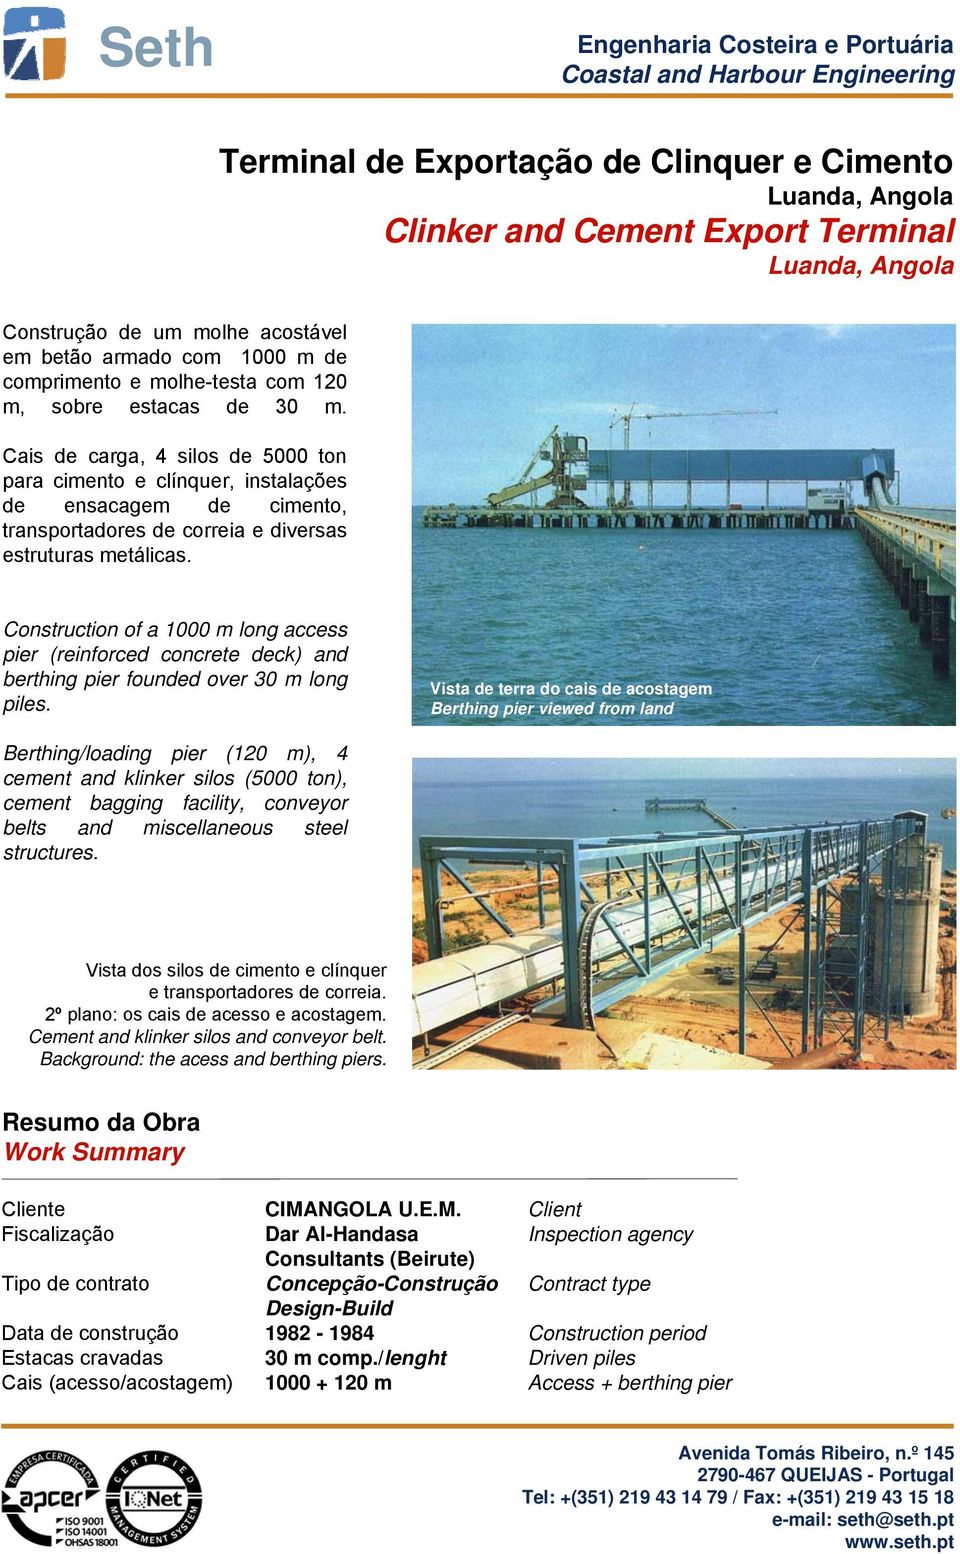 Construction of a 1000 m long access pier (reinforced concrete deck) and berthing pier founded over 30 m long piles.